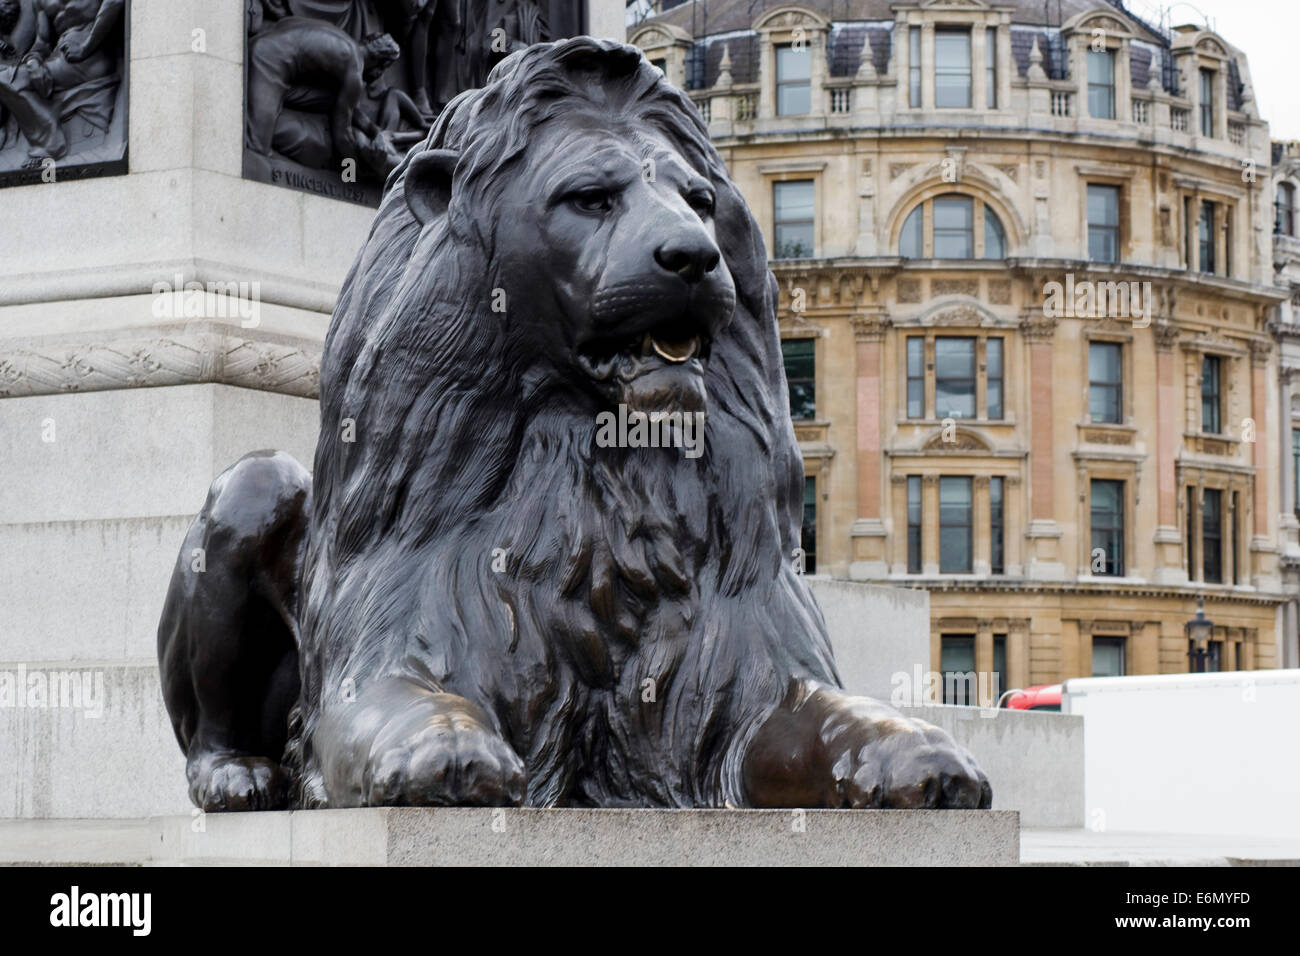 One of the famous lions at Trafalgar square London England Stock Photo